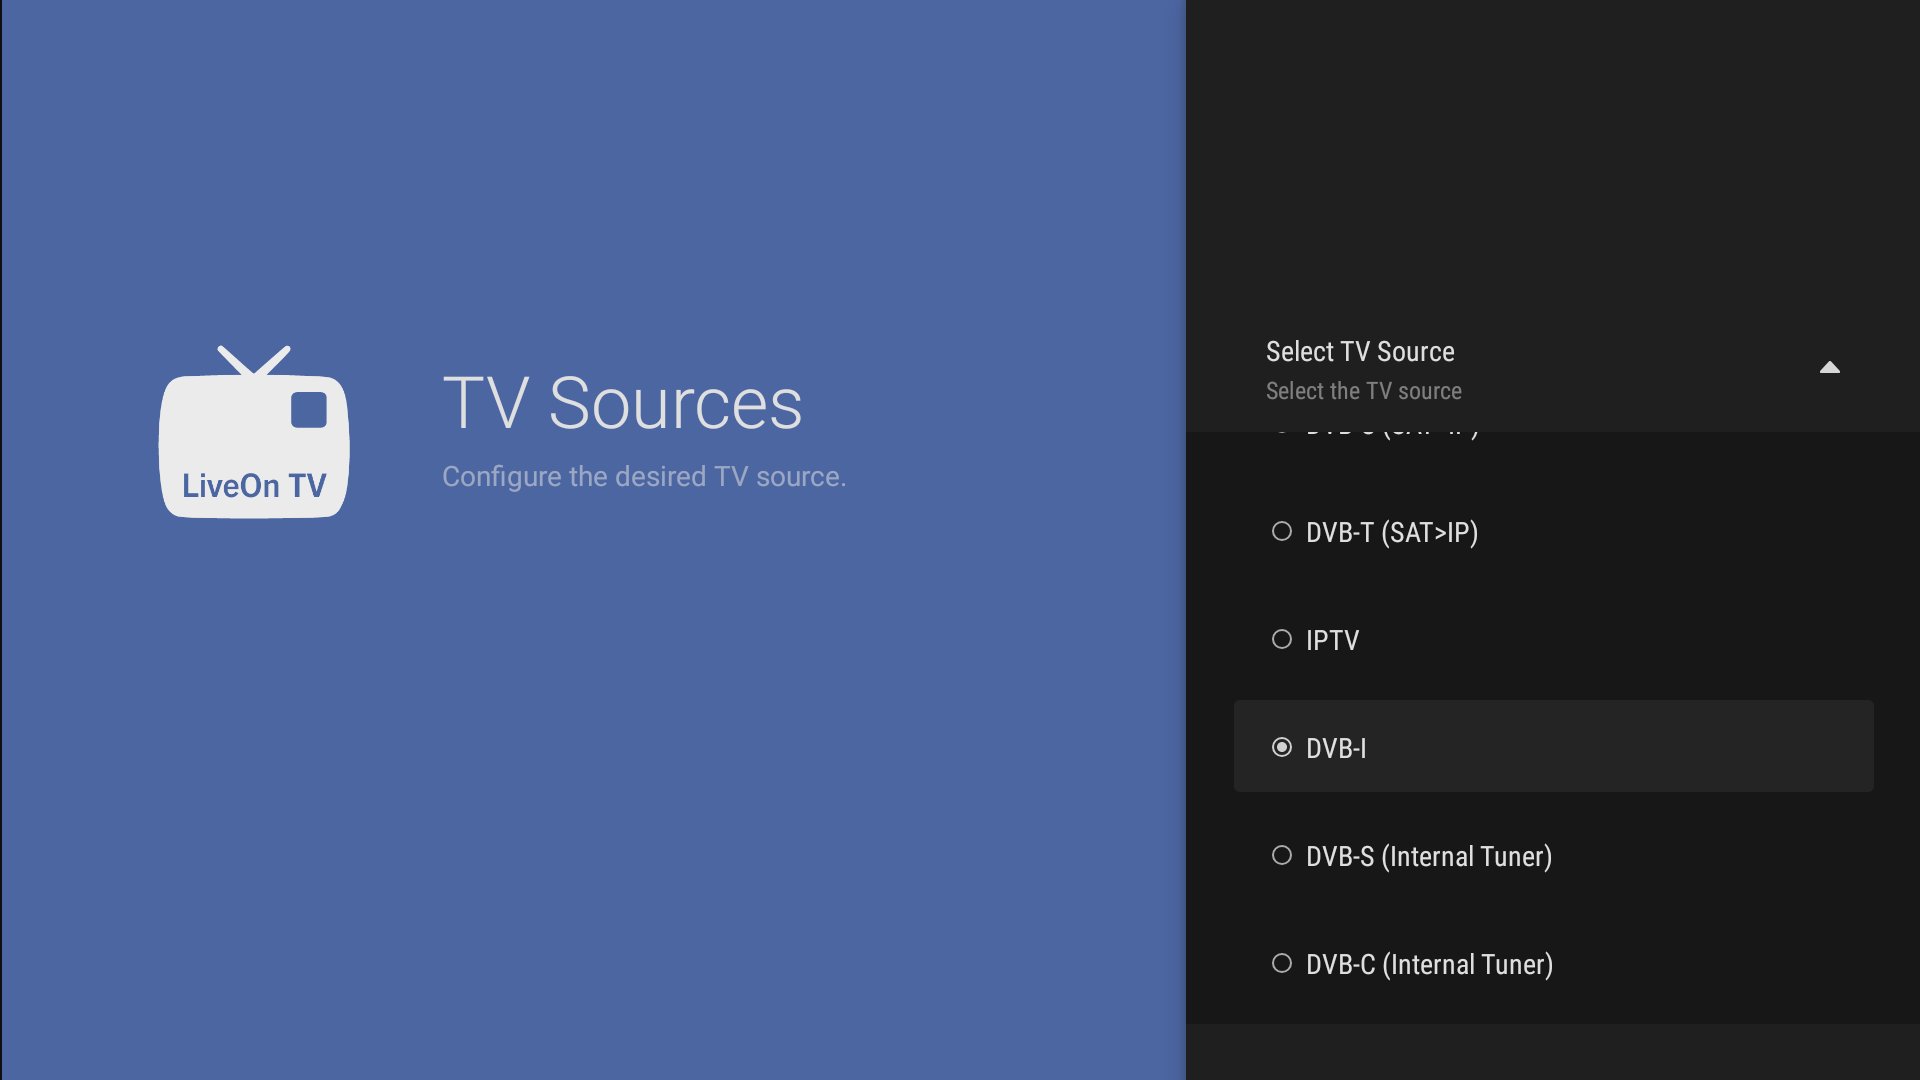 TV sources selection menu for configuration of the desired input